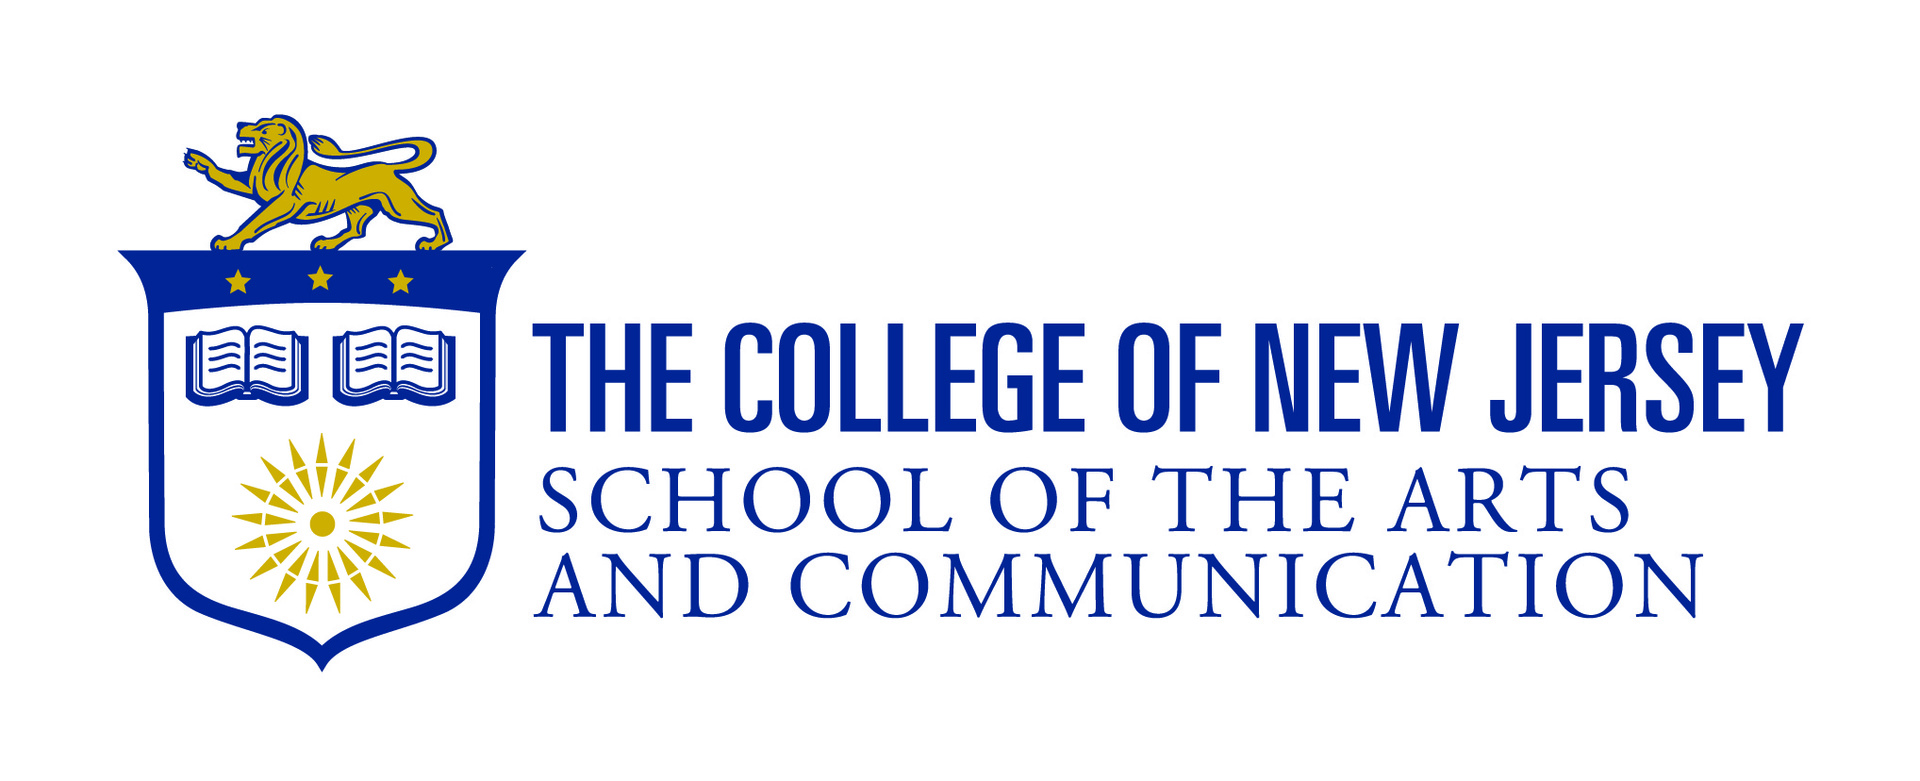 TCNJ School of the Arts and Communication